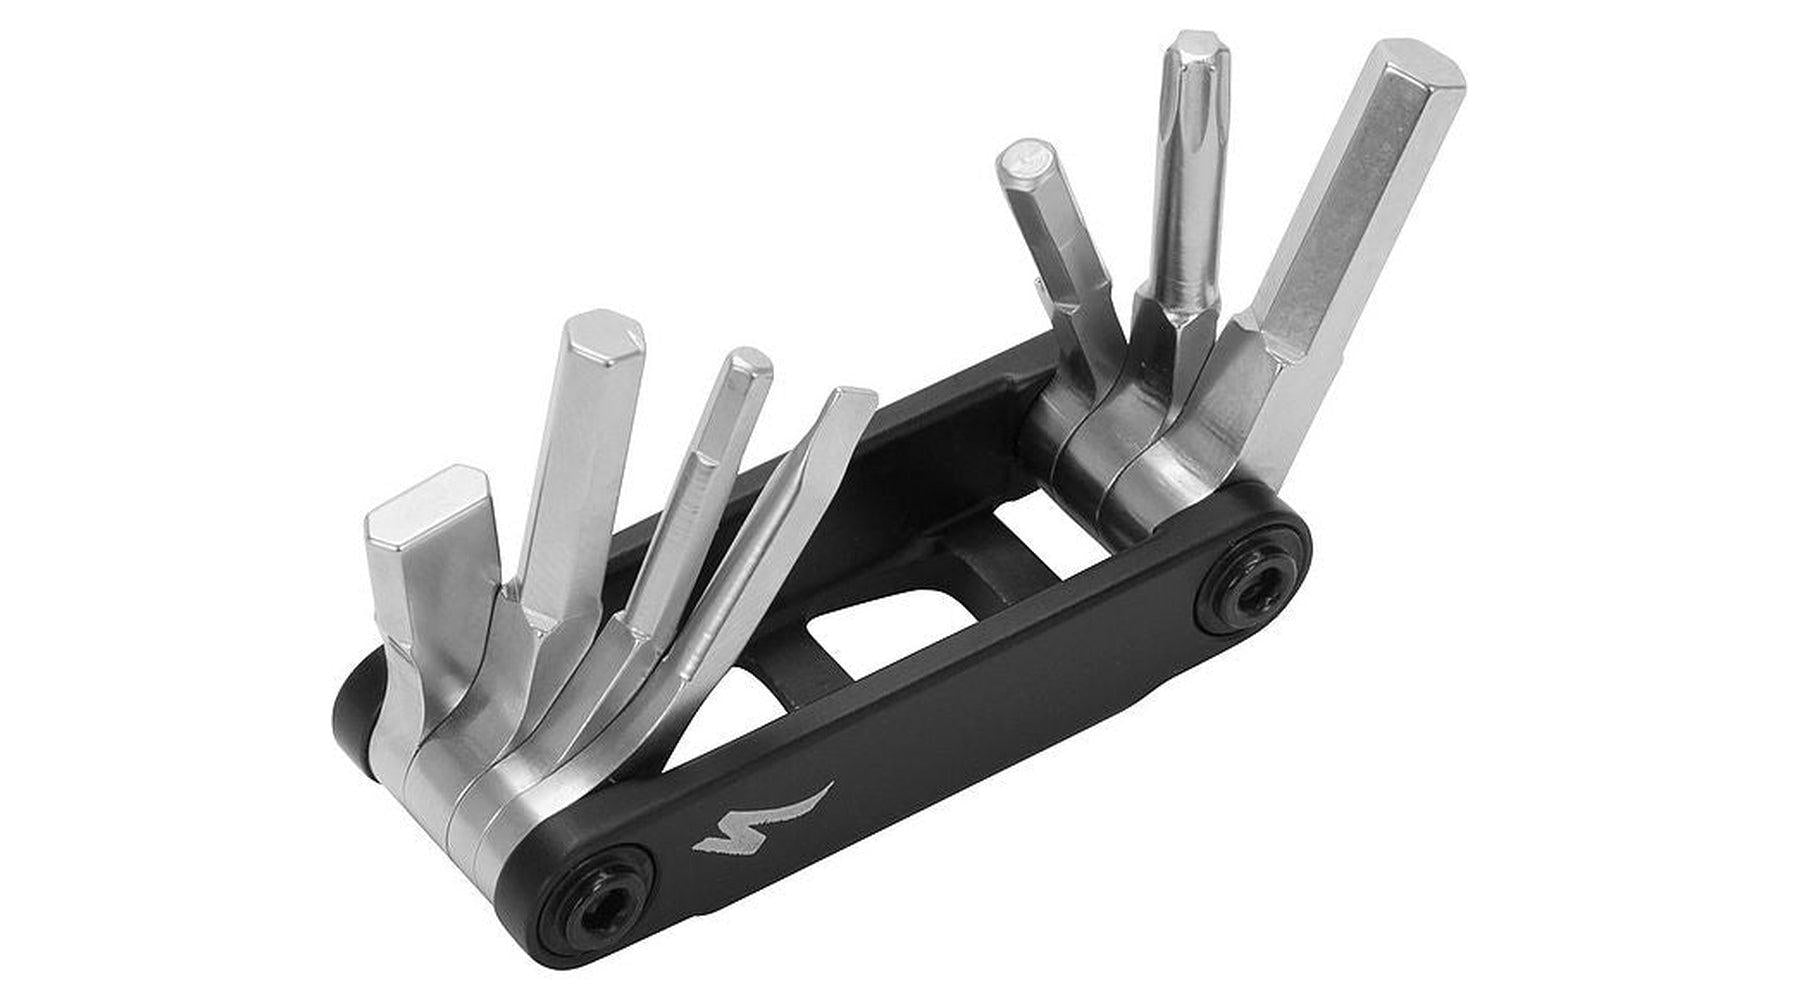 SWAT MTB TOOL ONLY | completecyclist - Replacement SWATª MTB Tool. Please note that this does not include a storage cradle to attach to a frame or cage.